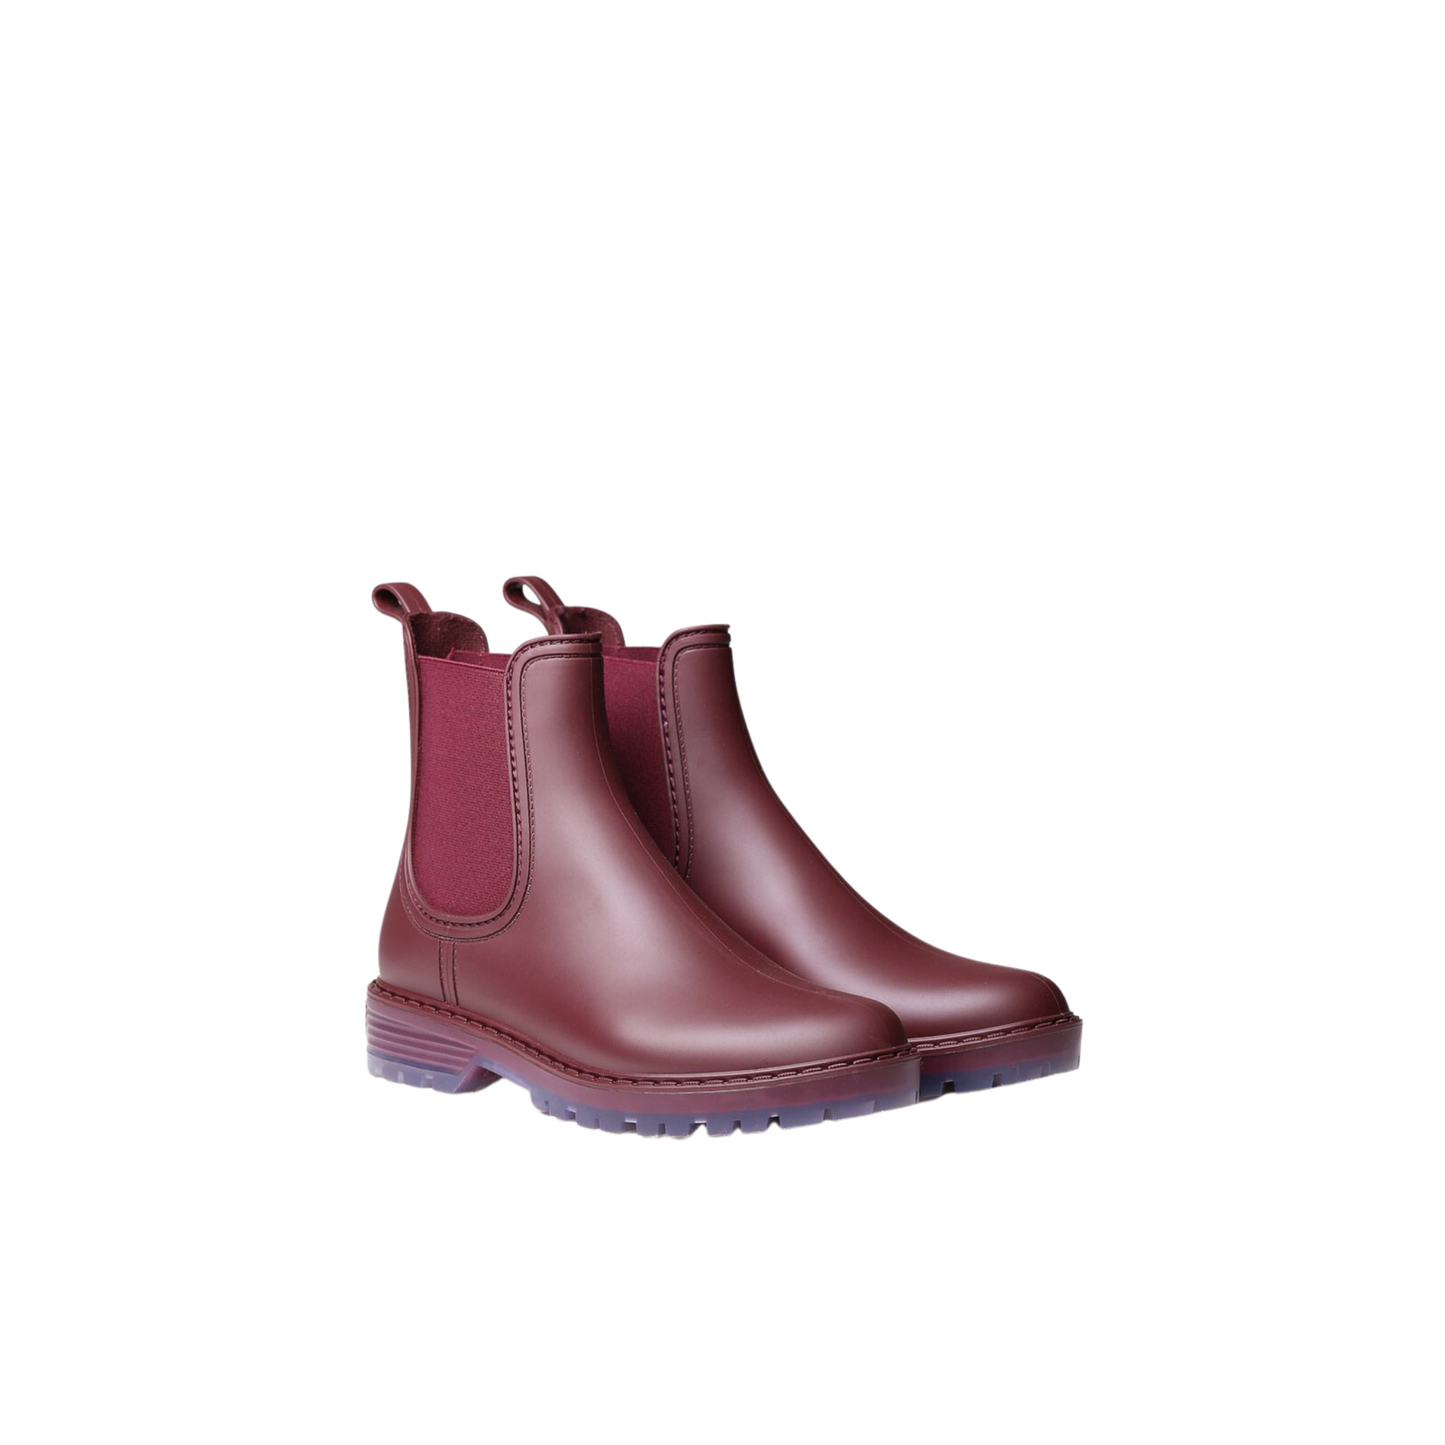 Front angled profiles of a pair of Toni Pons Coney Boots in the colour Burgundy.